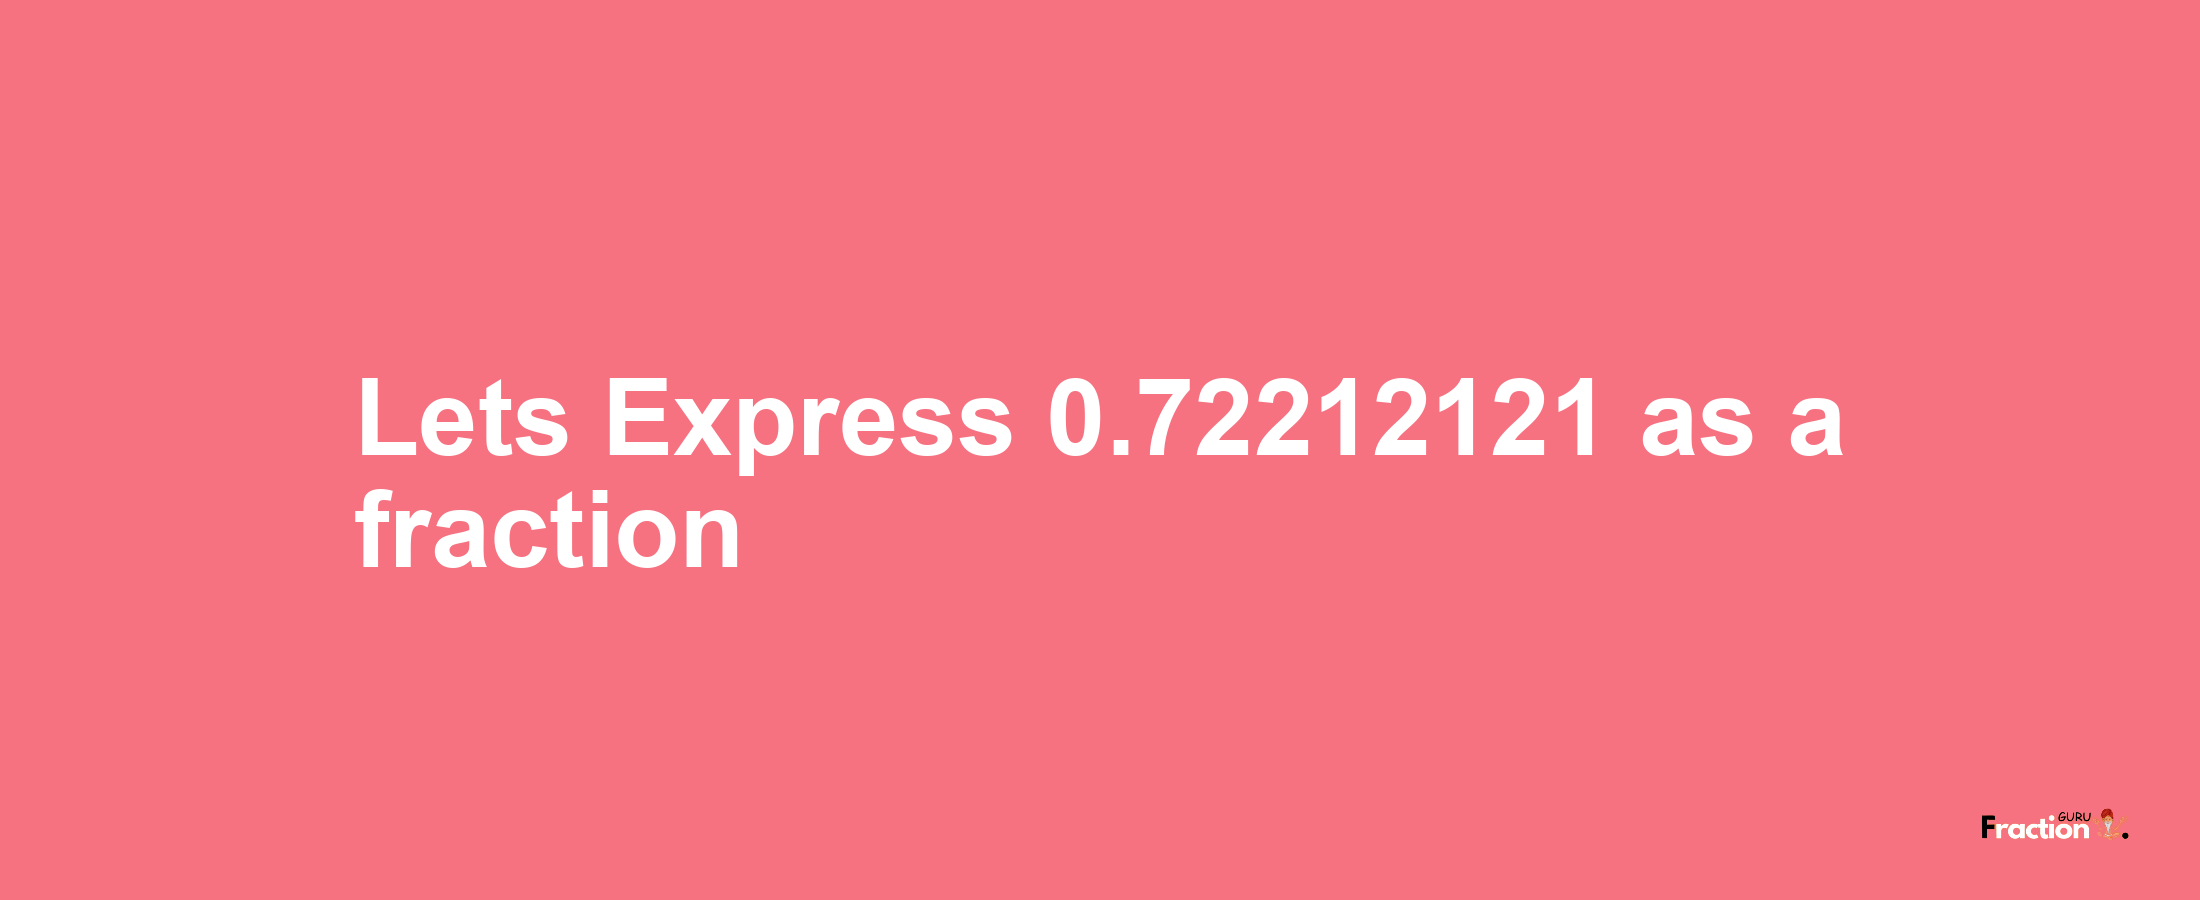 Lets Express 0.72212121 as afraction